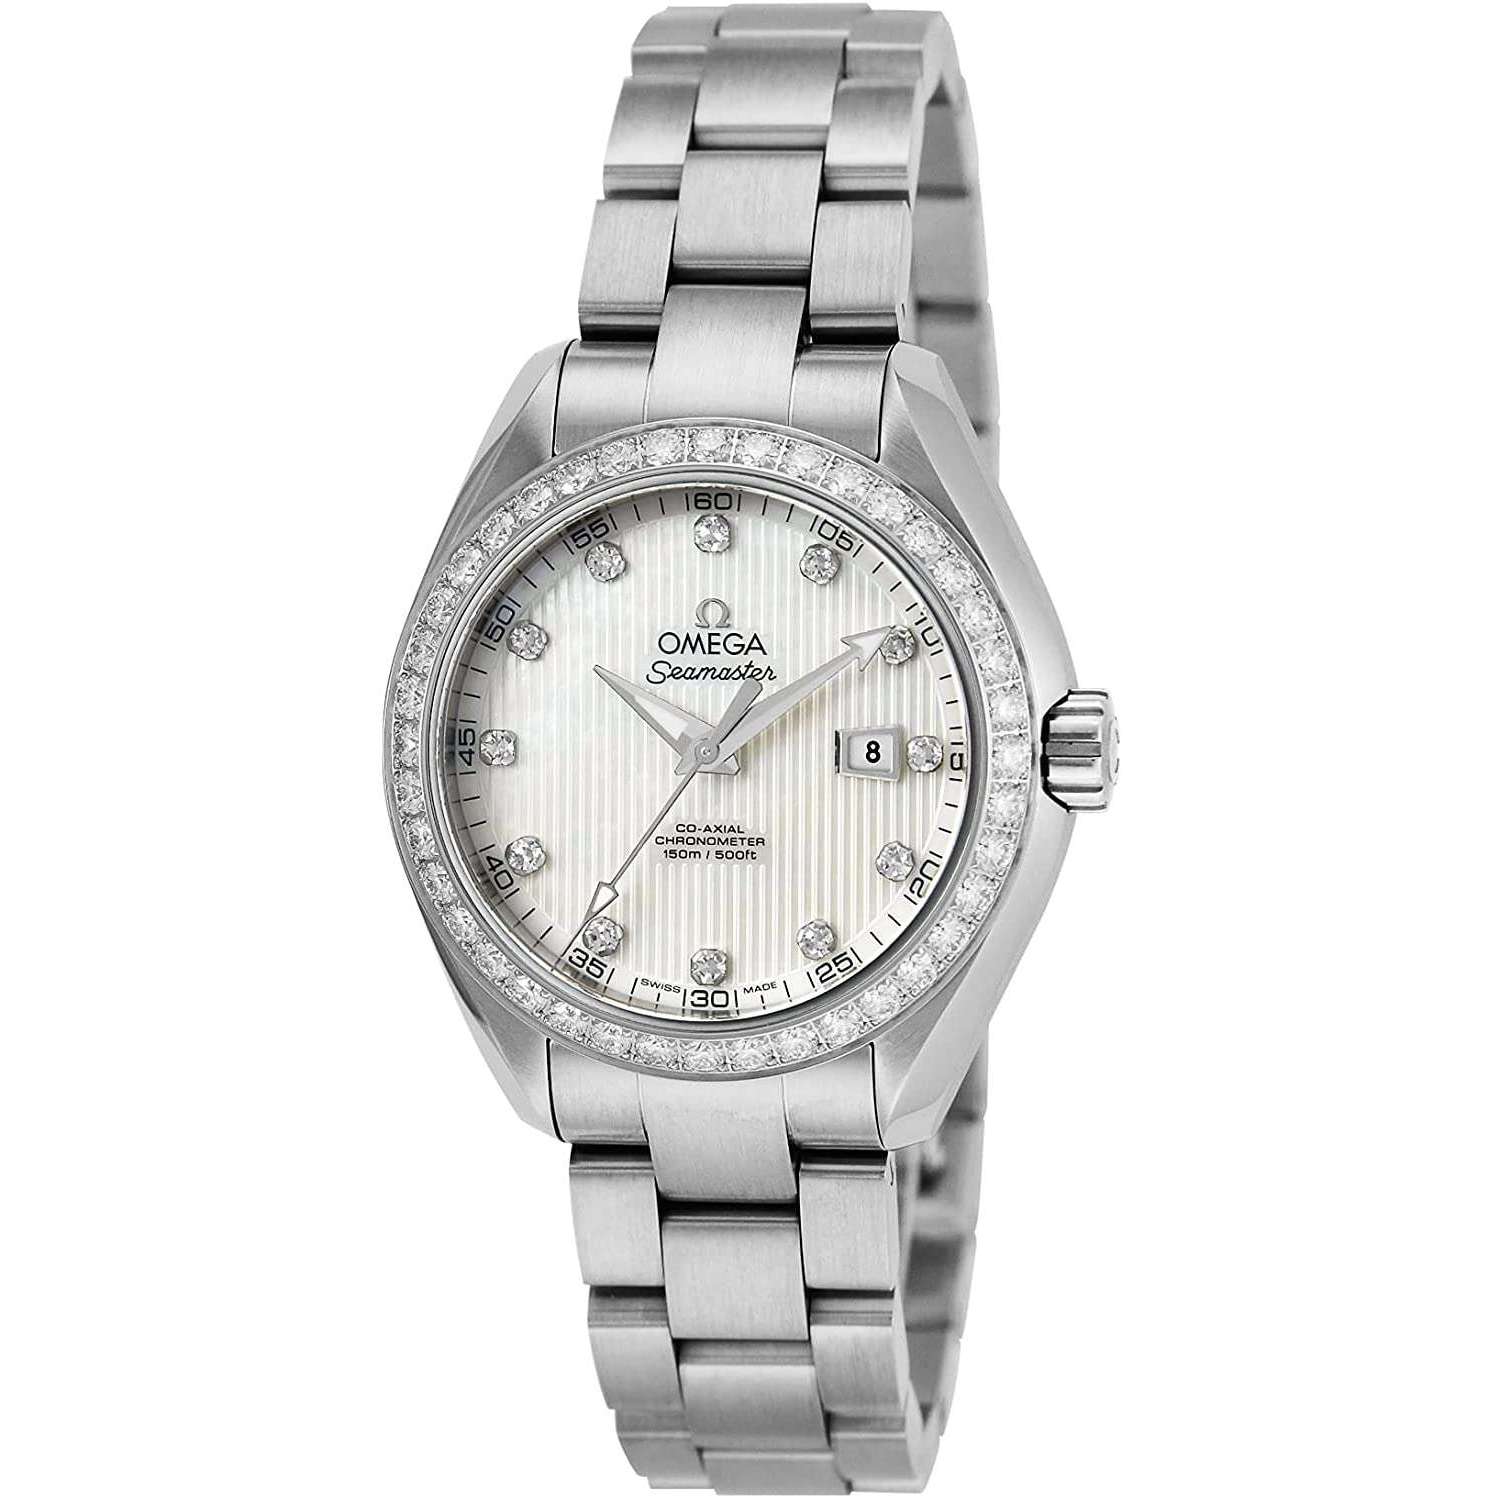 OMEGA SEAMASTER CO-AXIAL CHRONOMETER 34MM WOMEN WATCH 231.15.34.20.55.001 - ROOK JAPAN